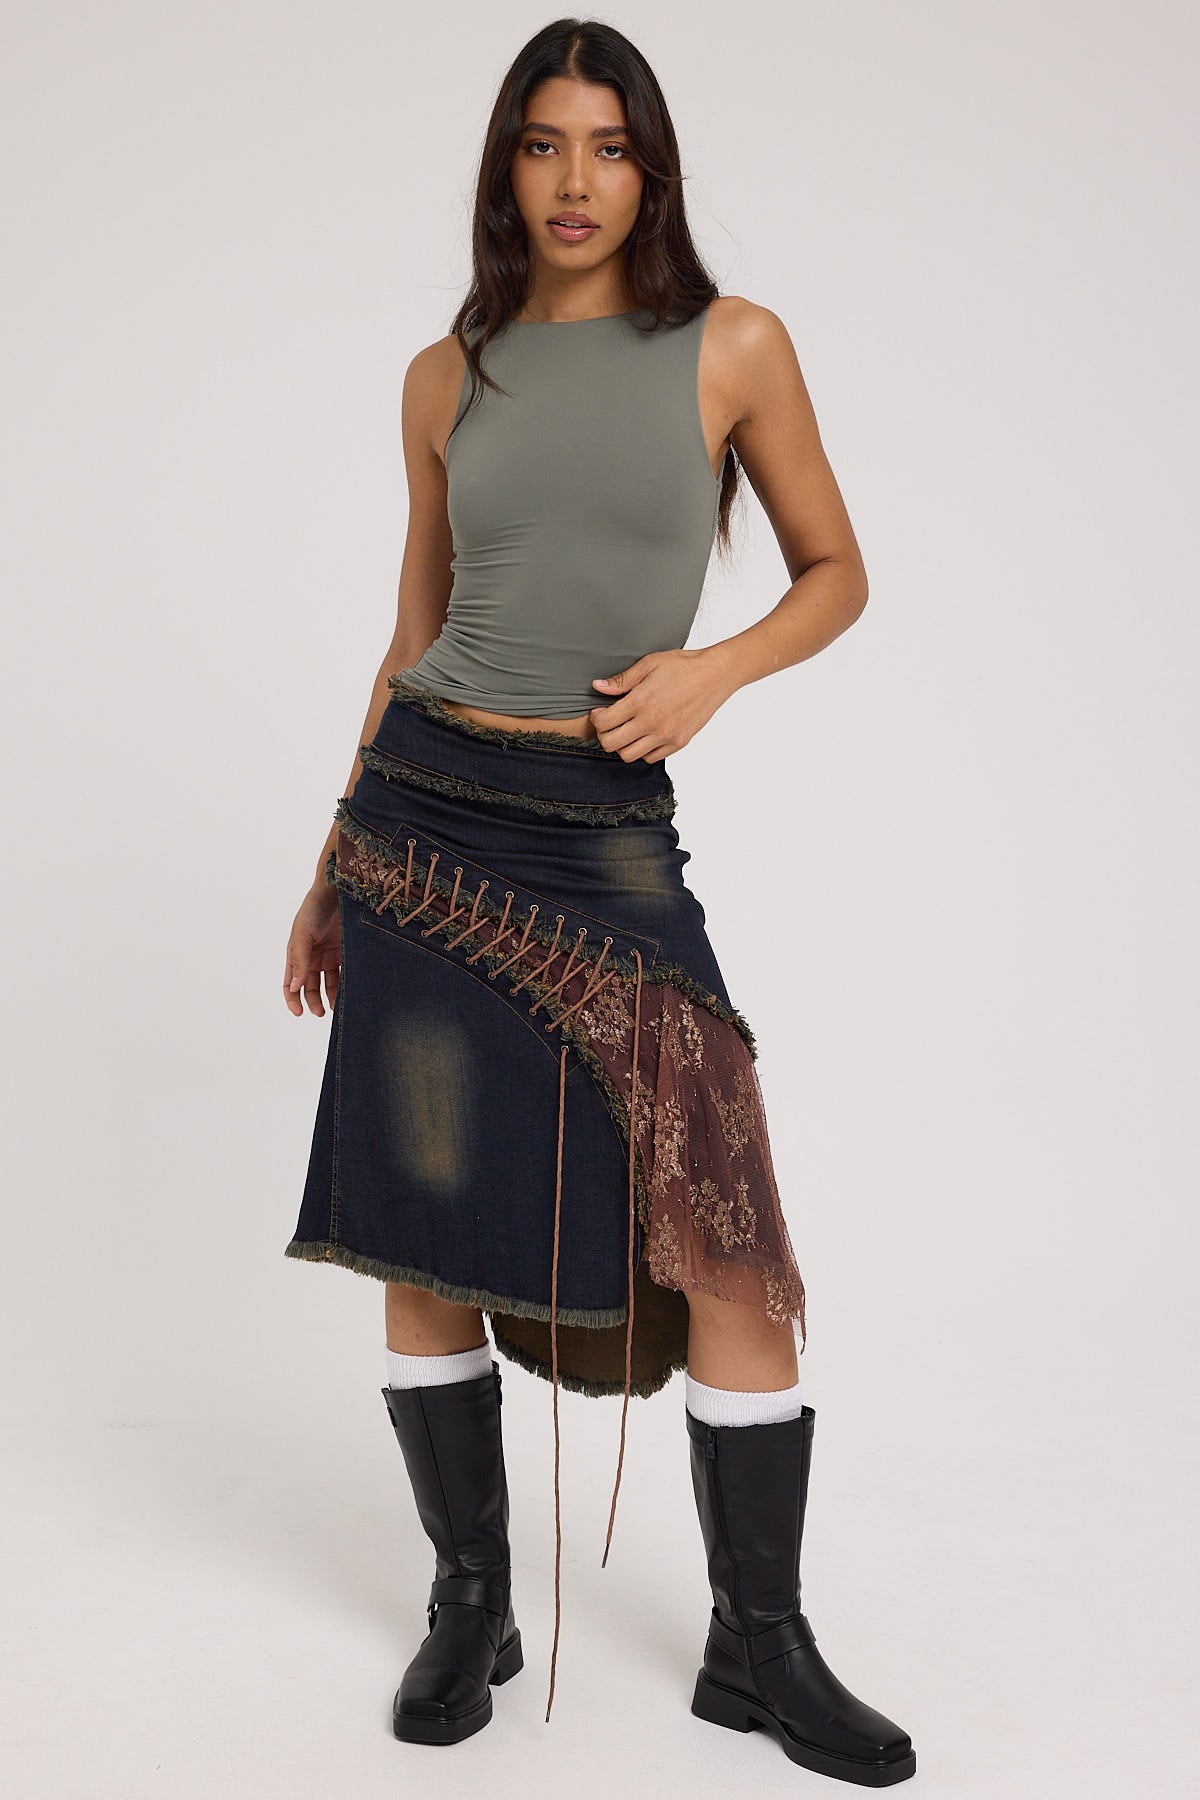 Basic Pleasure Mode Poison Ivy Lace Skirt Blue Brown